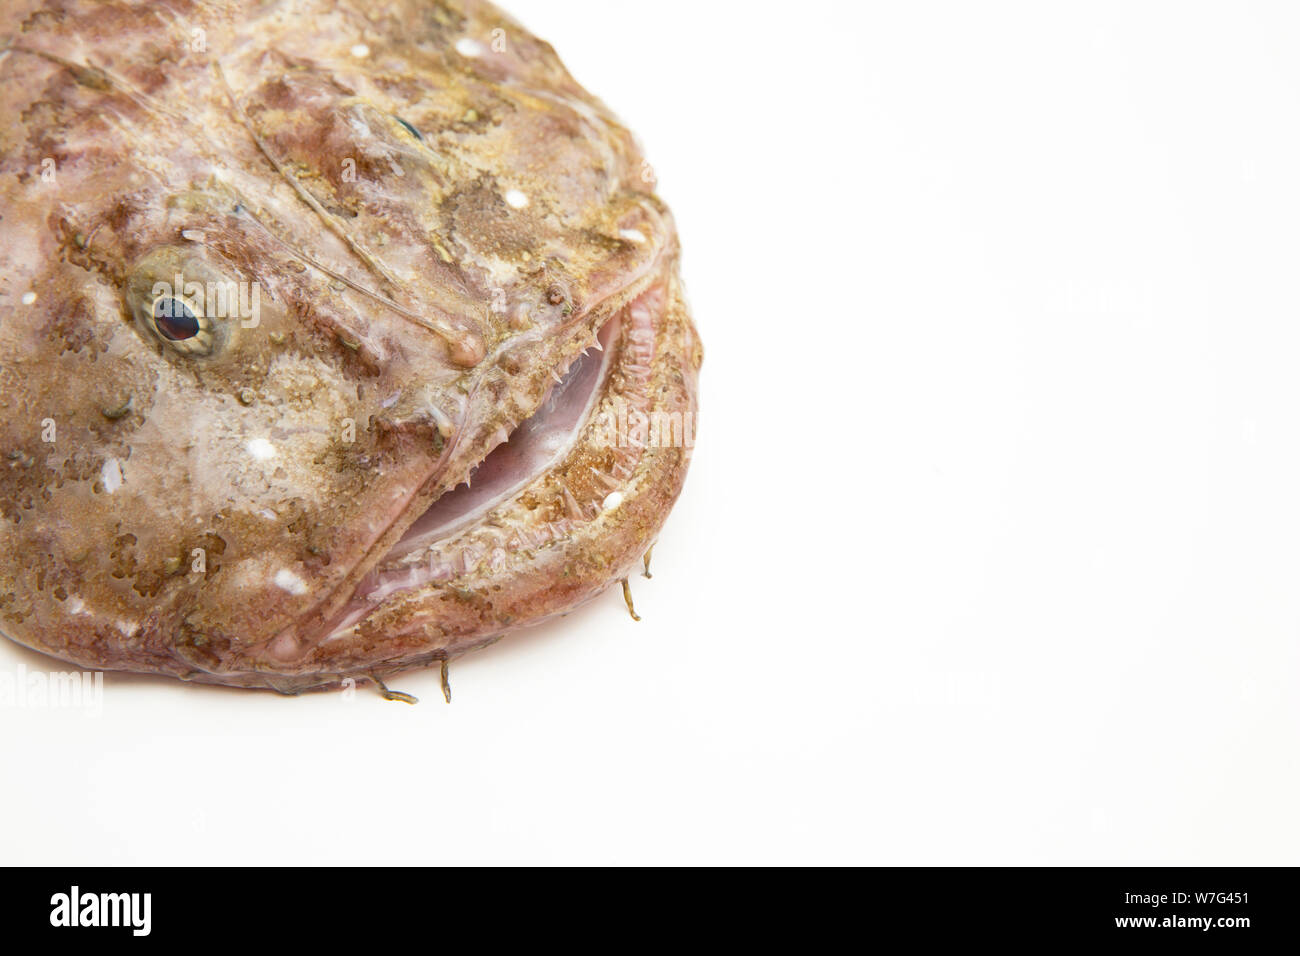 A monkfish or anglerfish, Lophius piscatorius, that was caught trawling in  the English Channel. Picture shows the detail of it head. There is some con  Stock Photo - Alamy